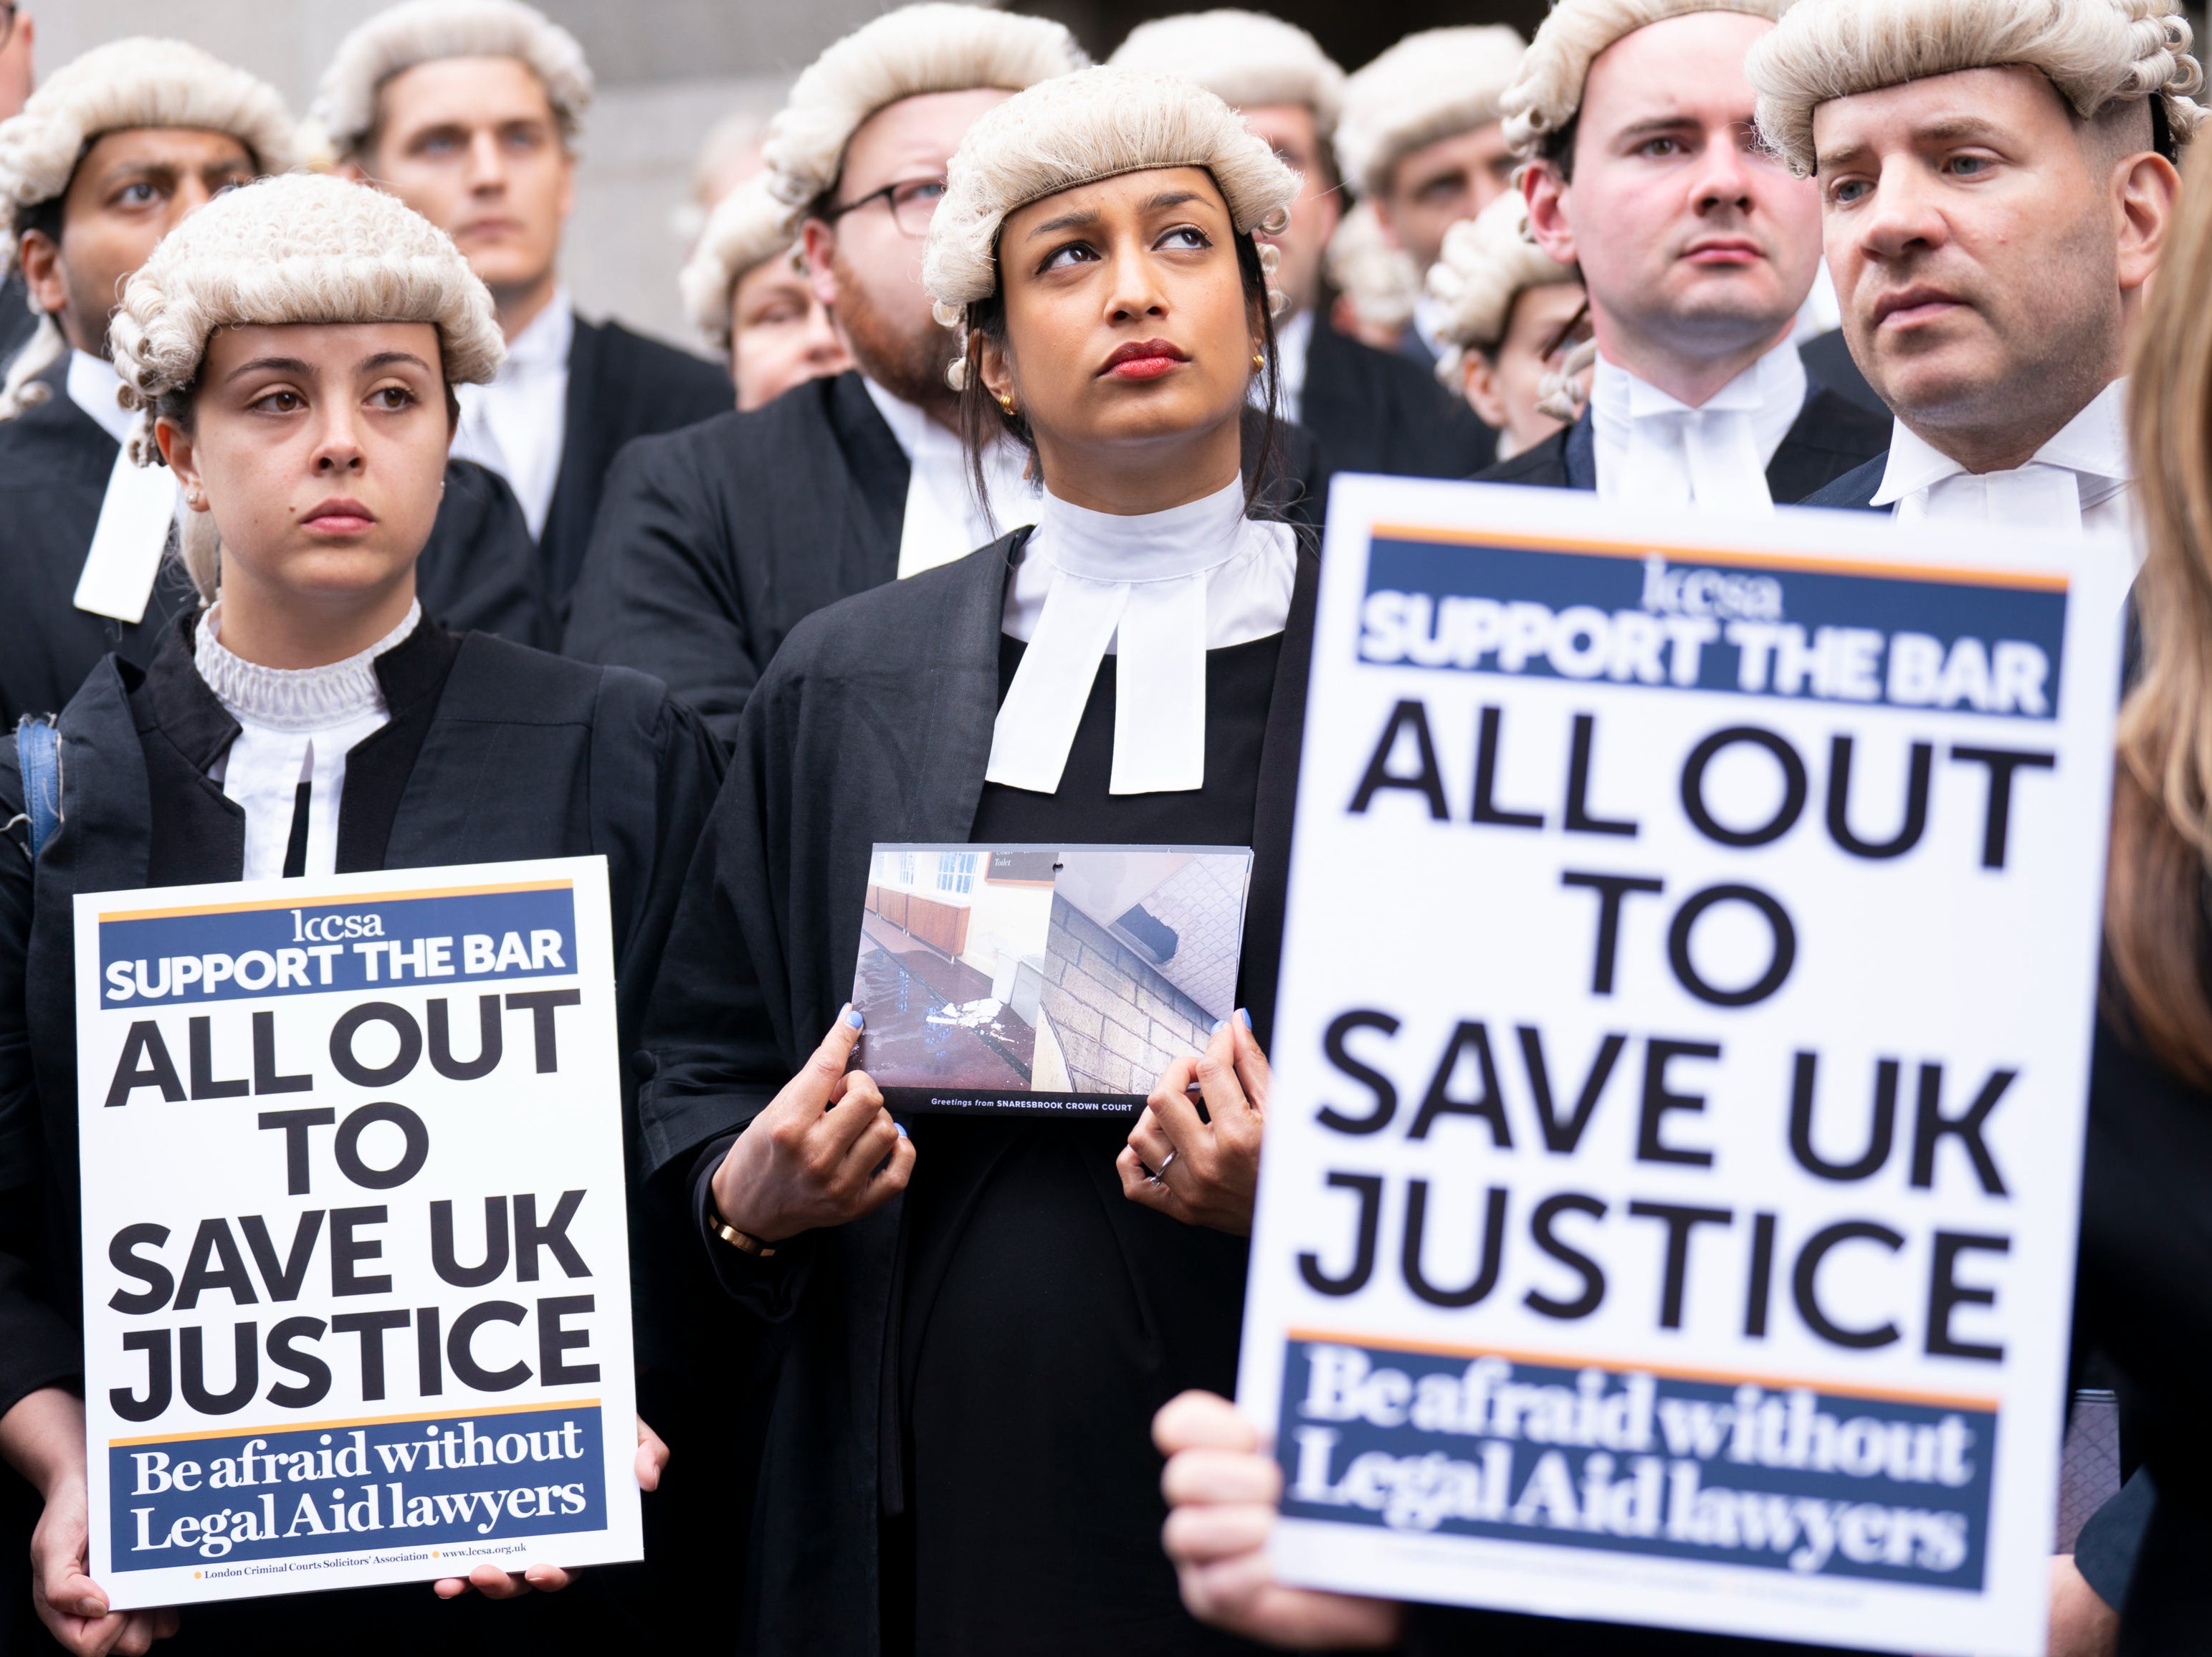 Criminal barristers from the Criminal Bar Association (CBA), which represents barristers in England and Wales, outside the Old Bailey, central London, on the first of several days of court walkouts by CBA members in a row over legal aid funding